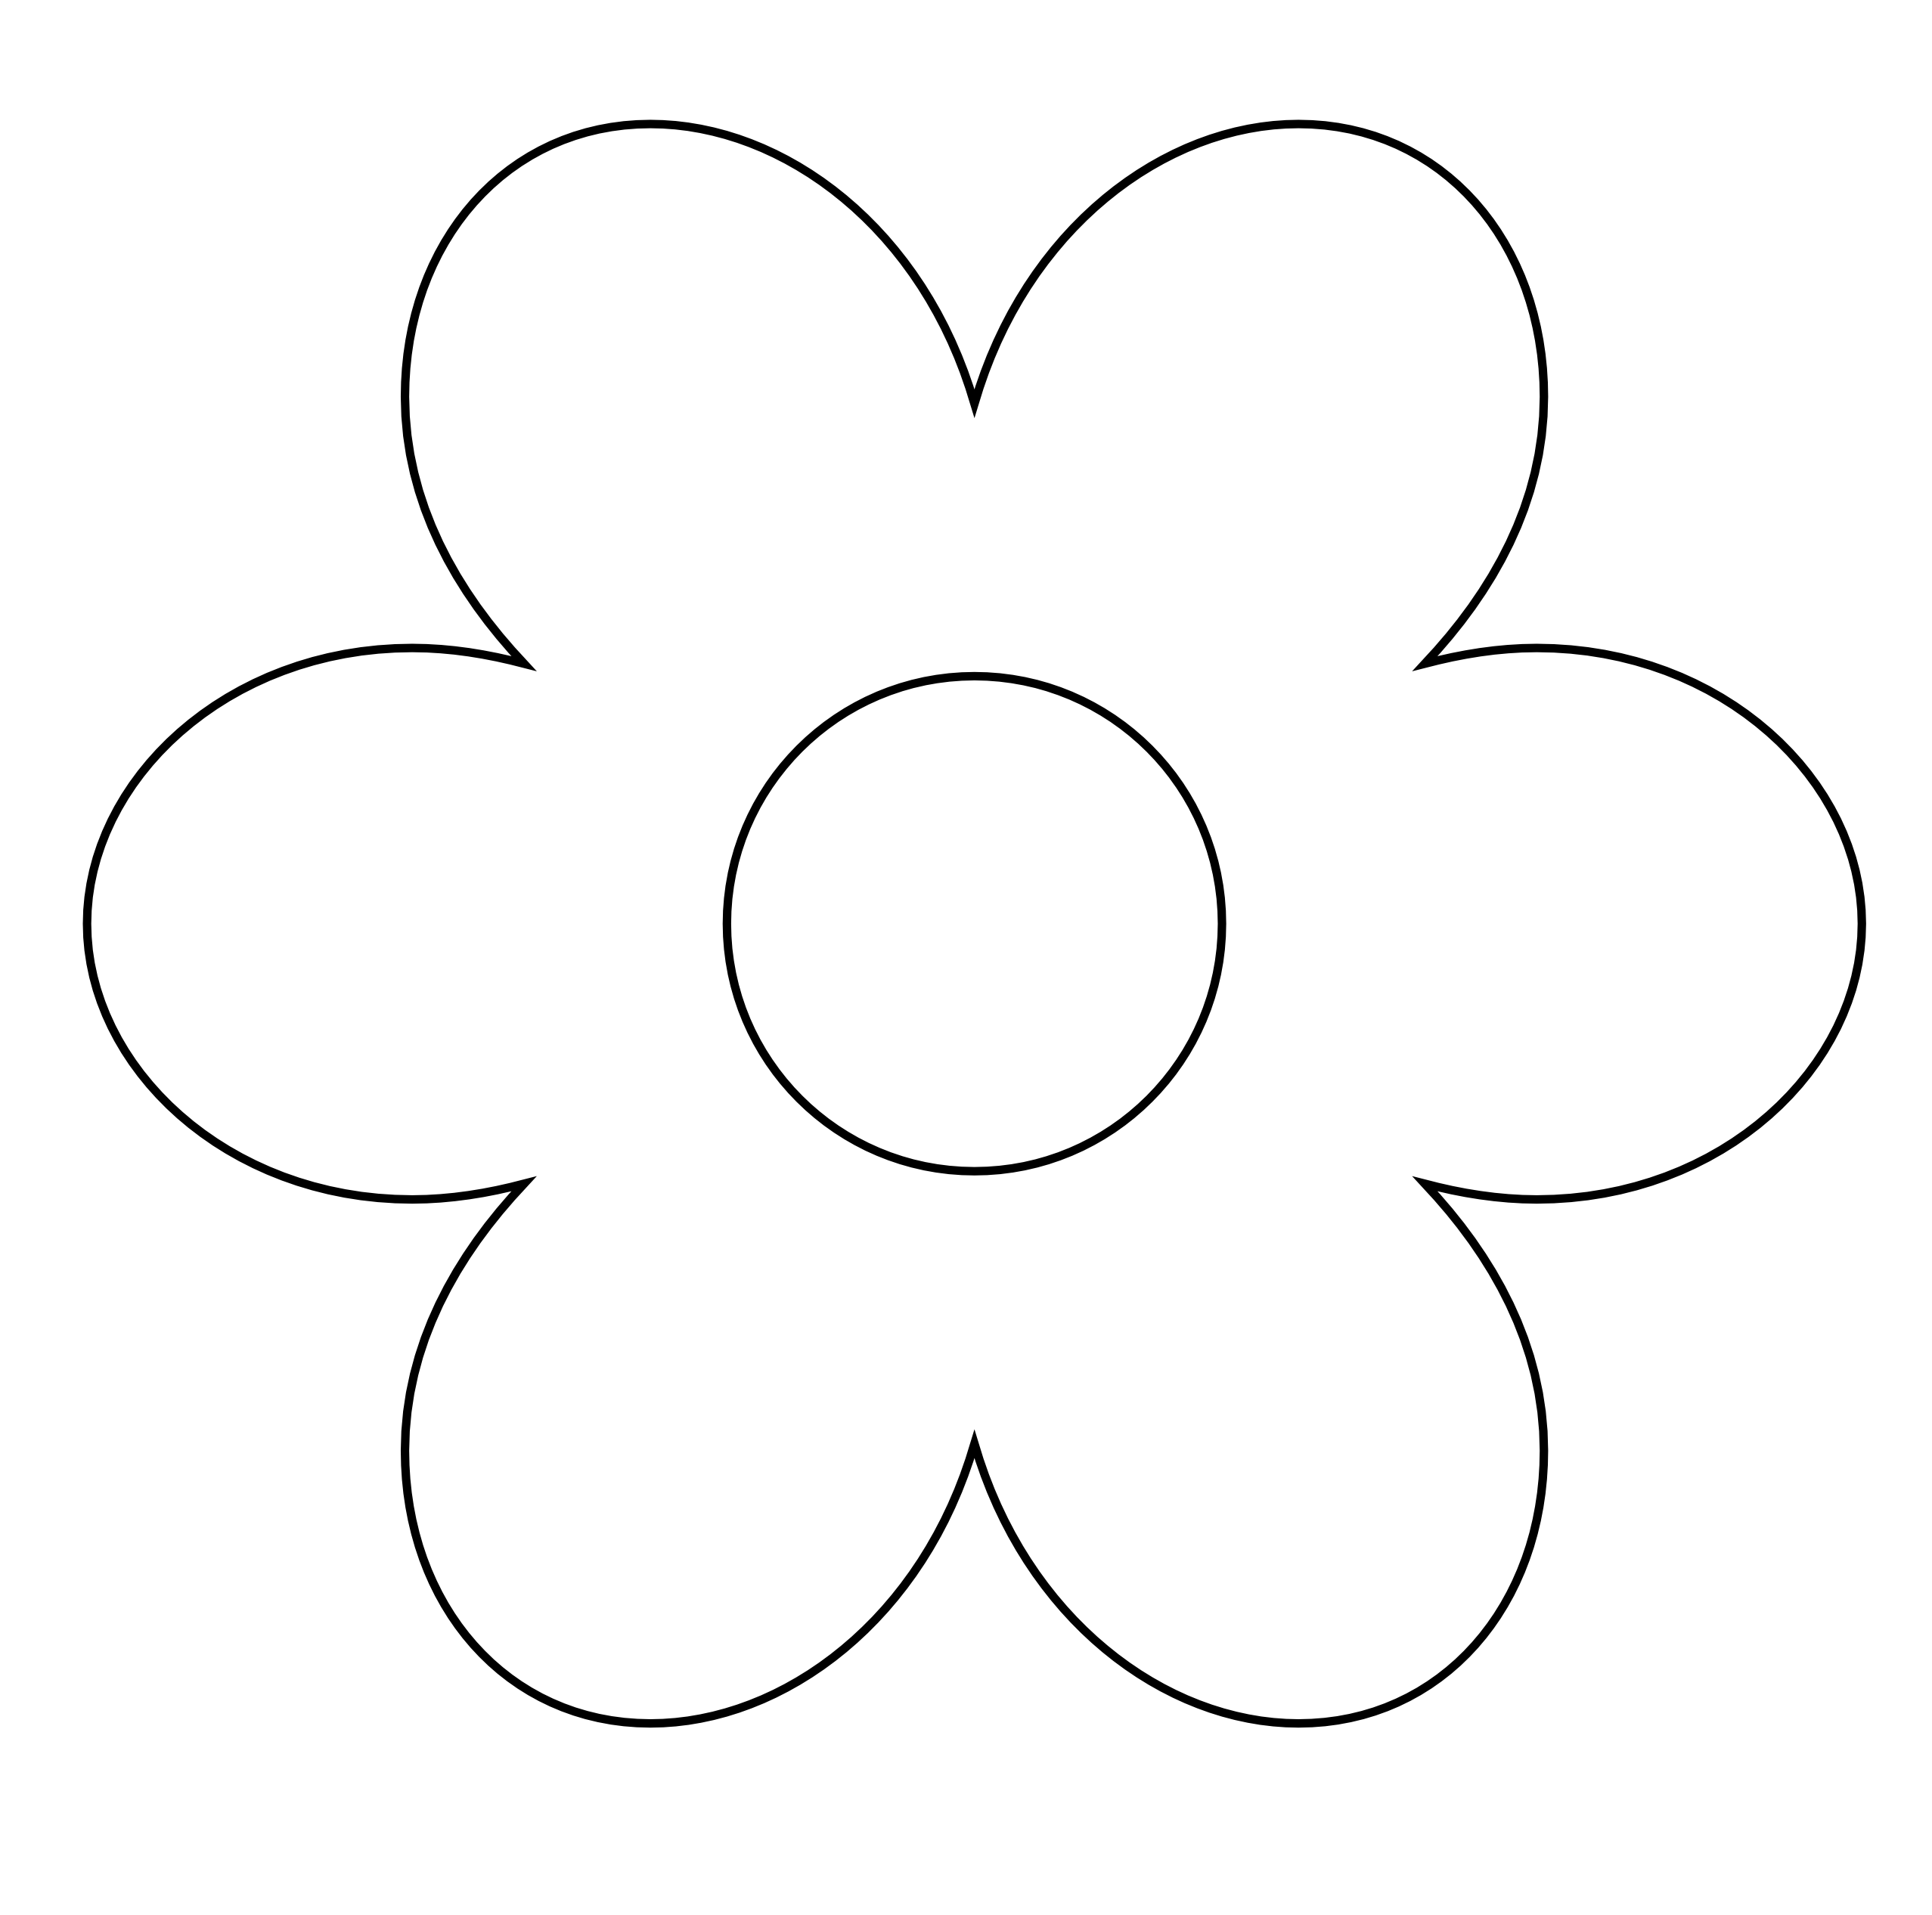 free-black-and-white-flower-image-download-free-black-and-white-flower-image-png-images-free